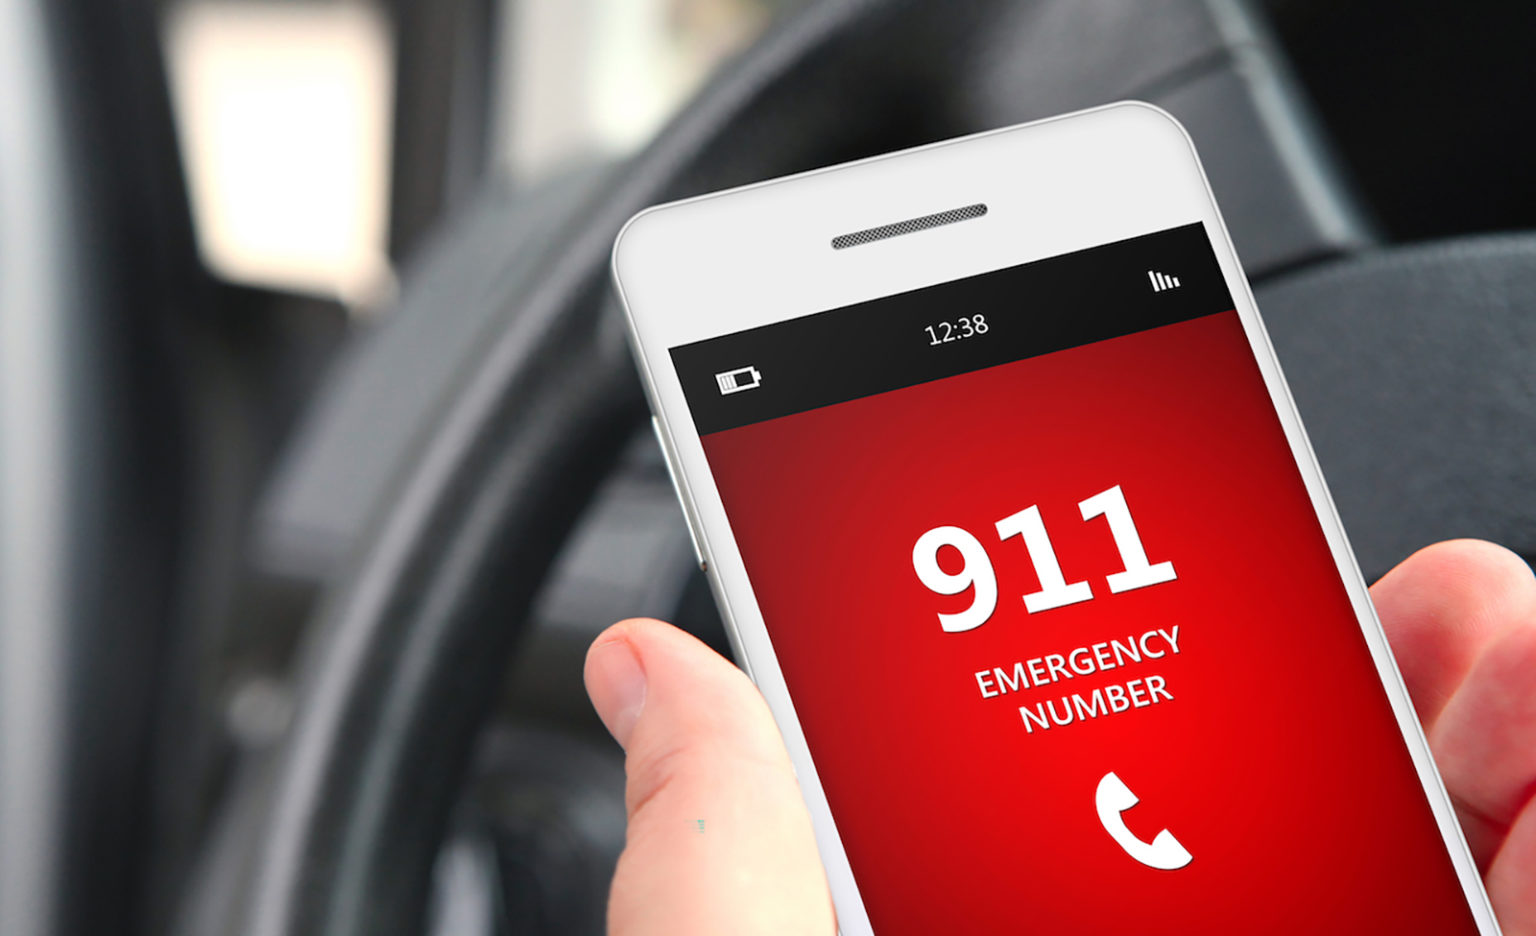 Data shows alarming 911 trends for EMS calls during COVID19 pandemic